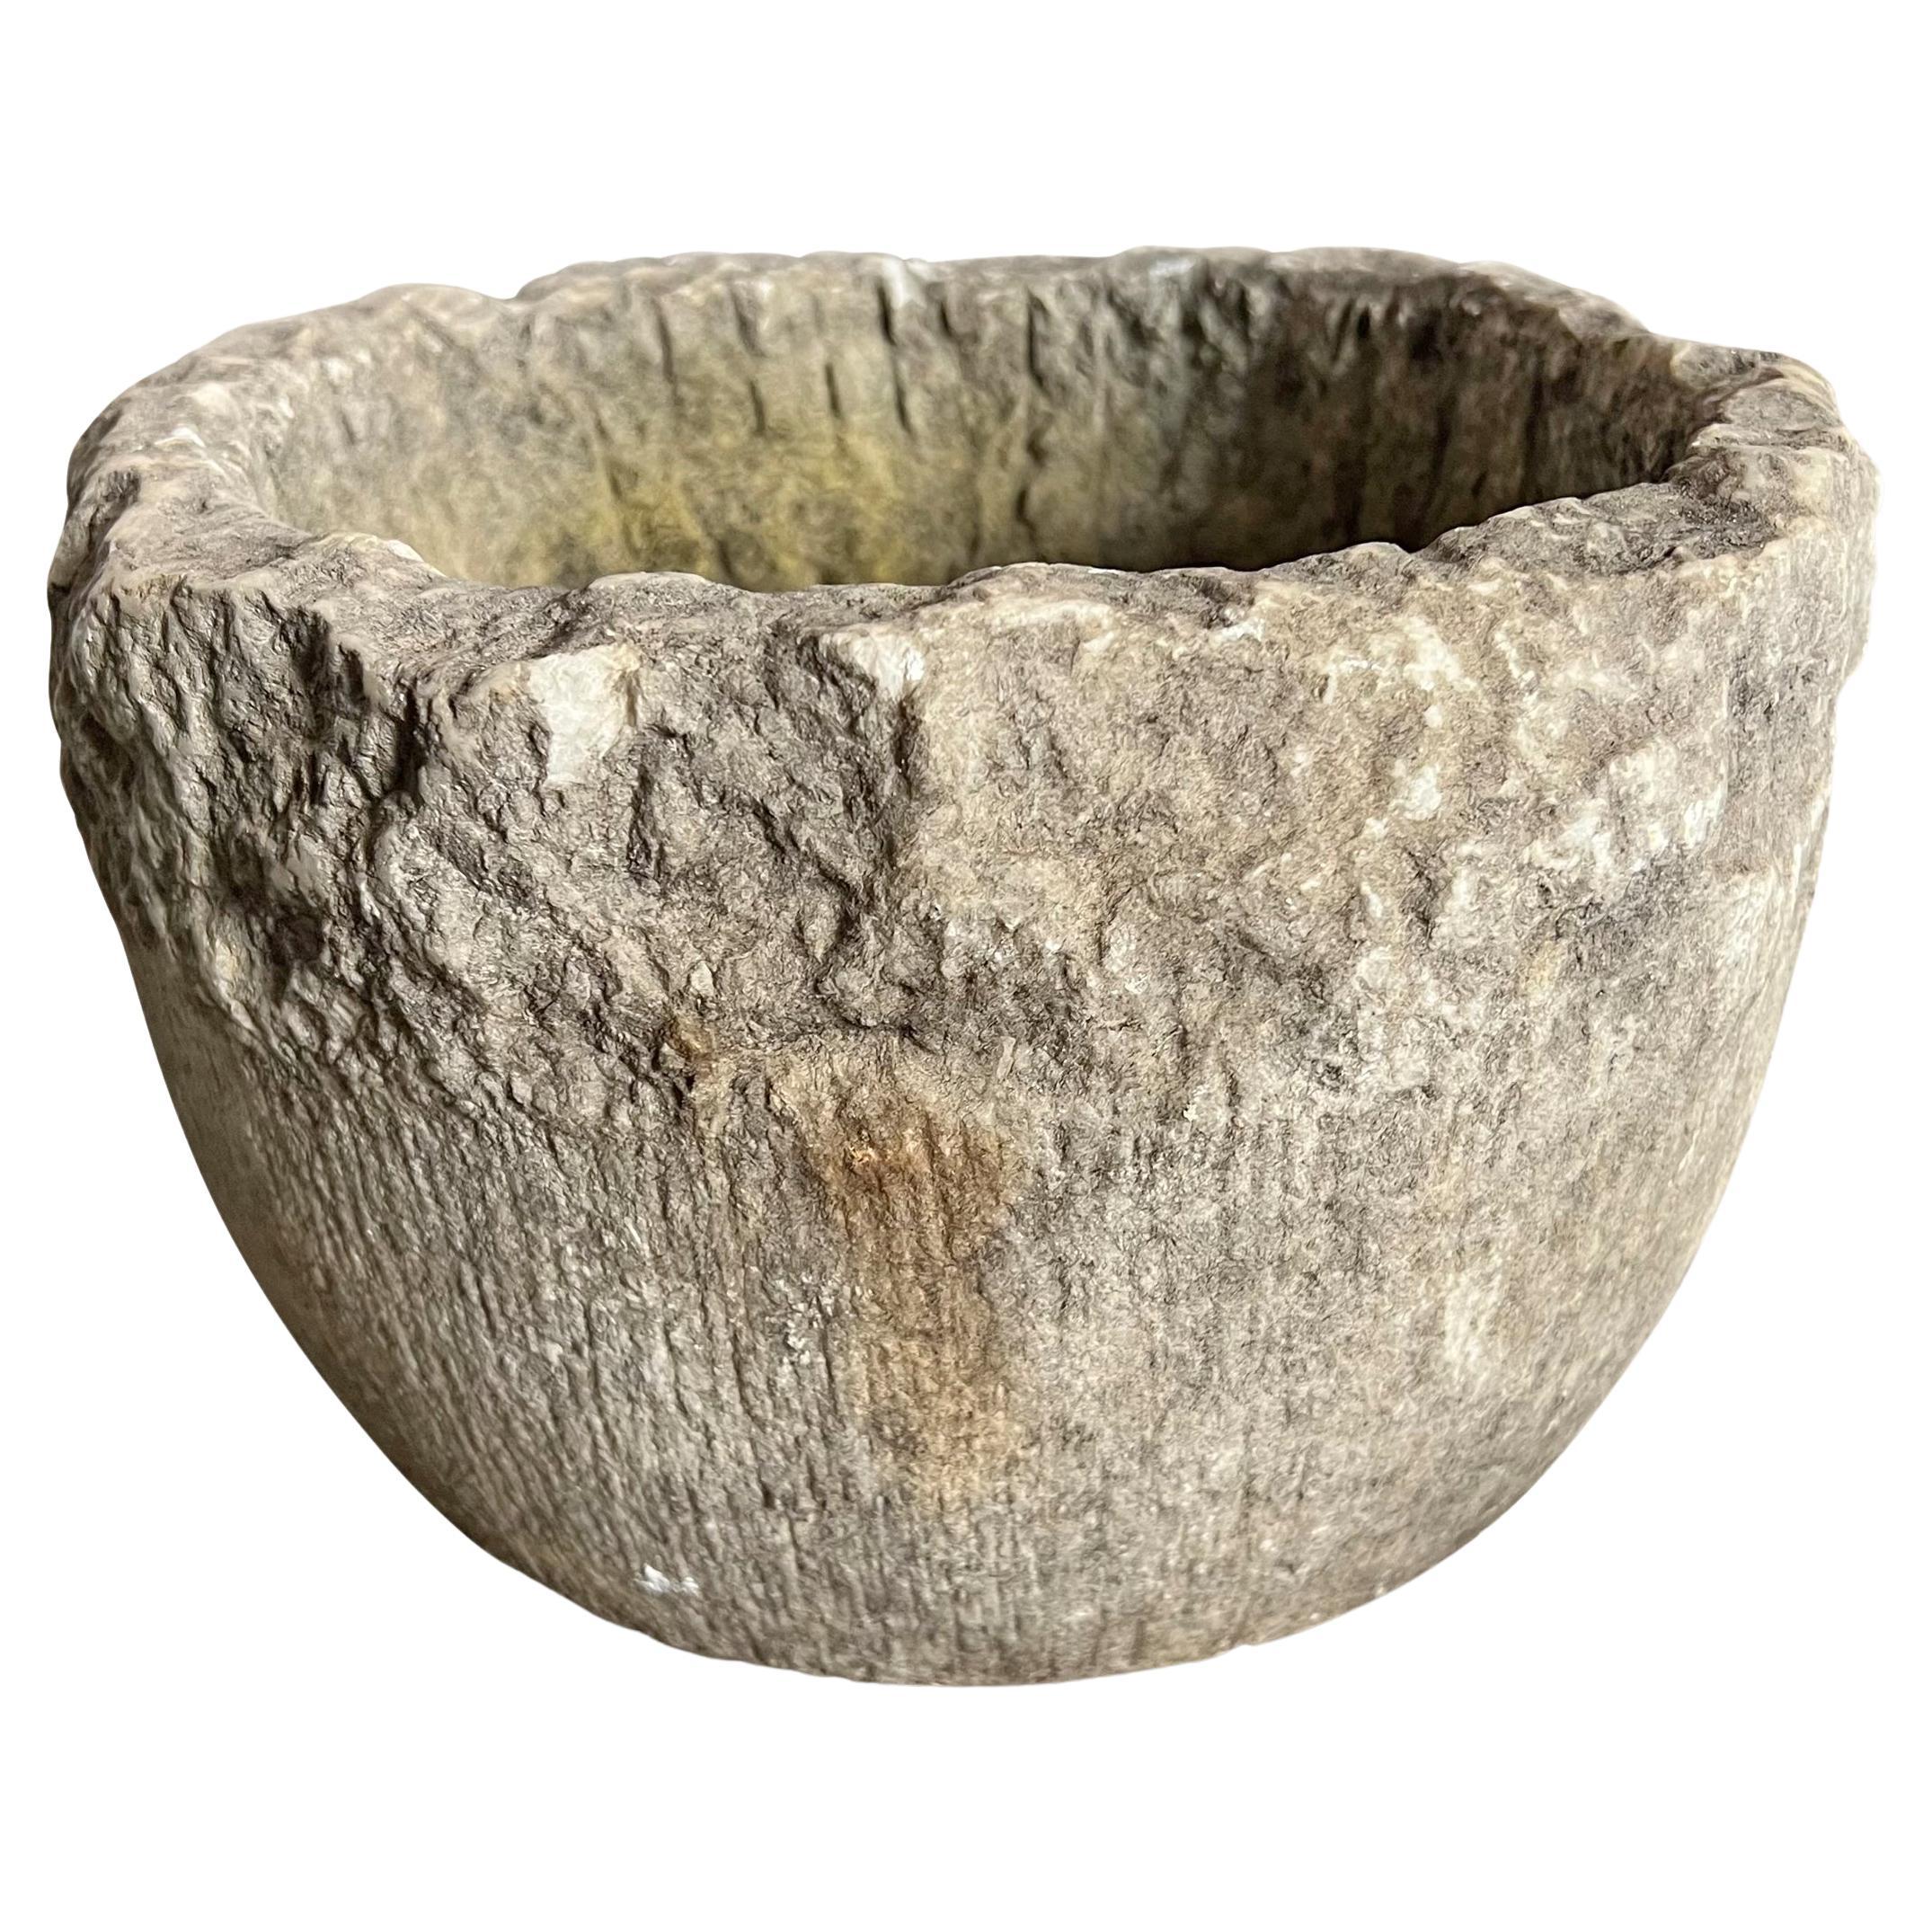 Carved Stone Planter For Sale